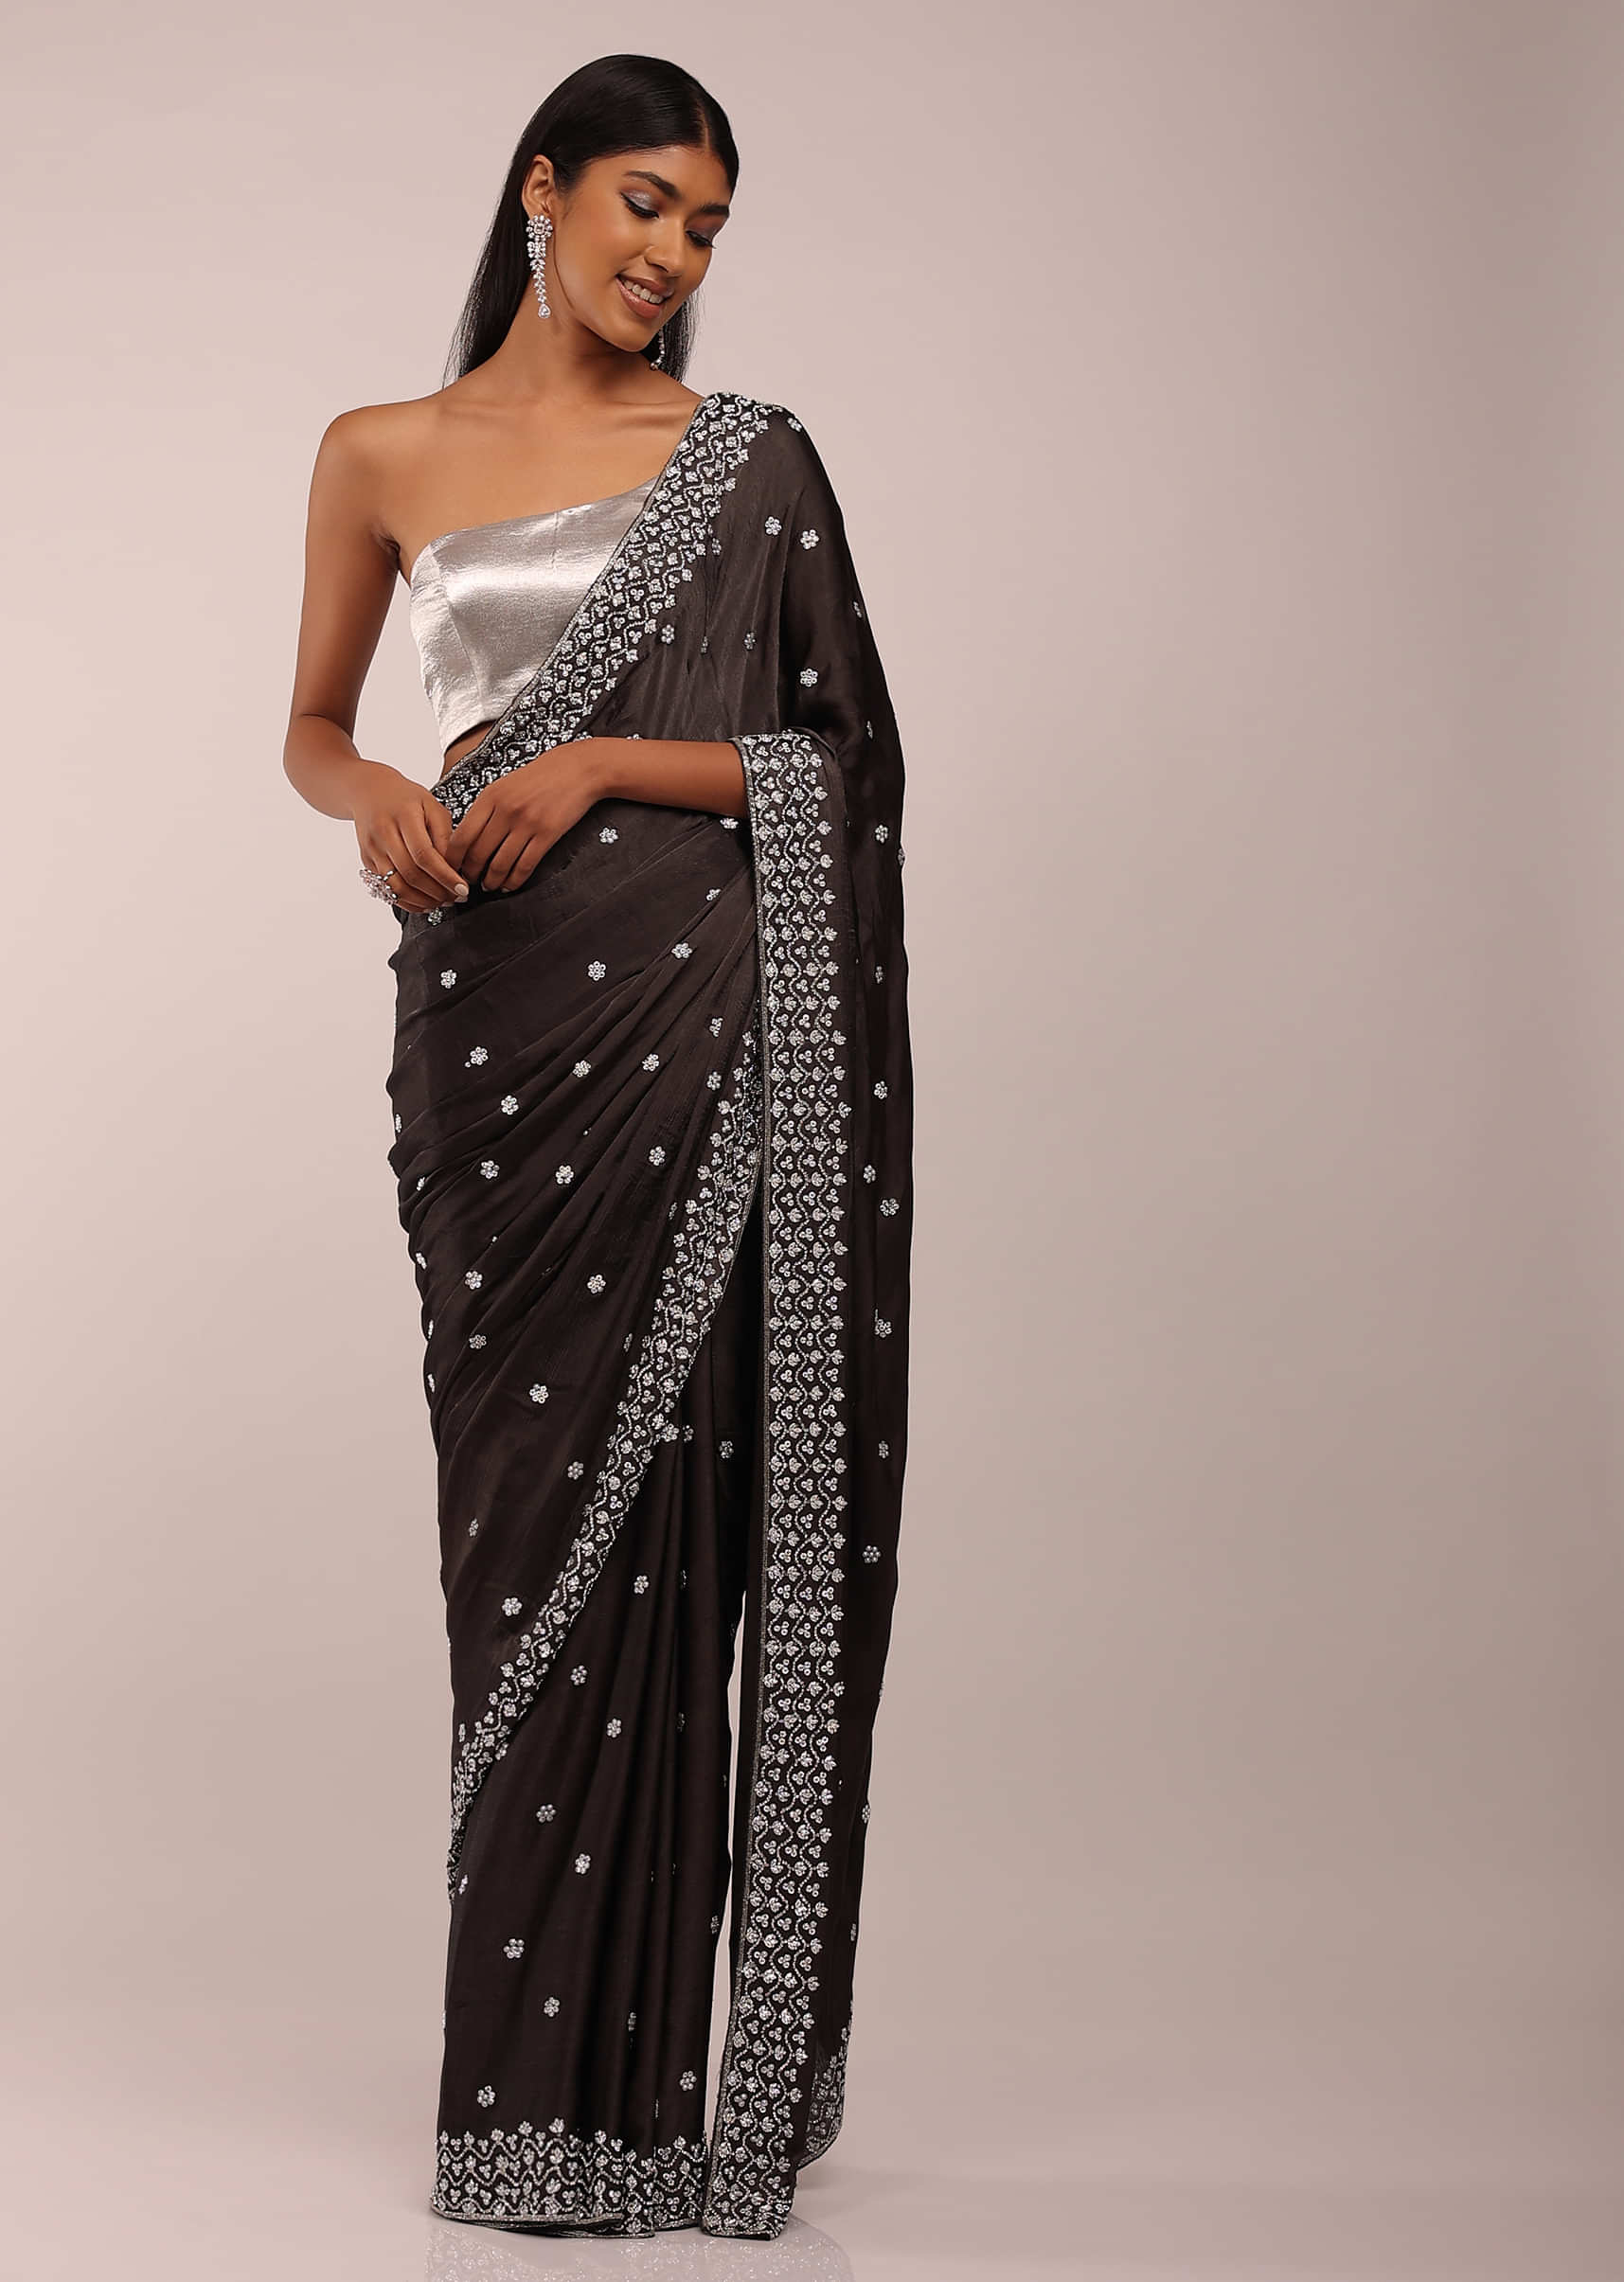 Dark Coffee Satin Saree In Silver Petals And Beads Embellishment Buttis With Petal Sequins And Stones On The Border